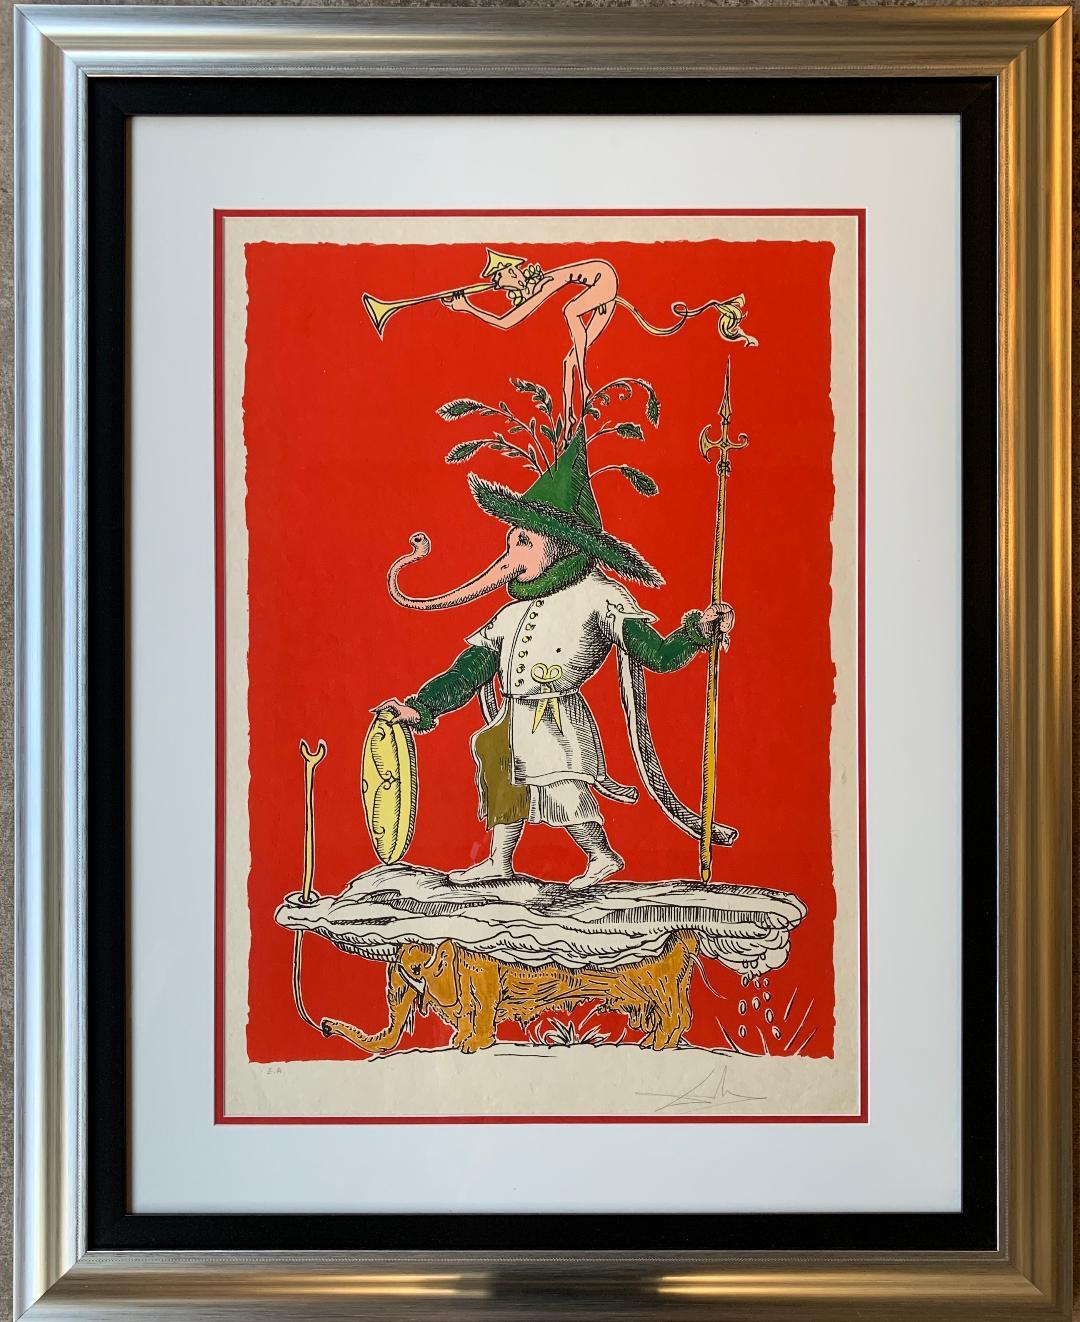 Salvador Dali signed E. A. series les Songes Drolatiques de Pantagruel suite

Salvador Dali's untitled cooperative lithograph from his series of 25 works of Les Songes Drolatiques de Pantagruel is hand-signed in pencil by Dali and is a rare E.A.